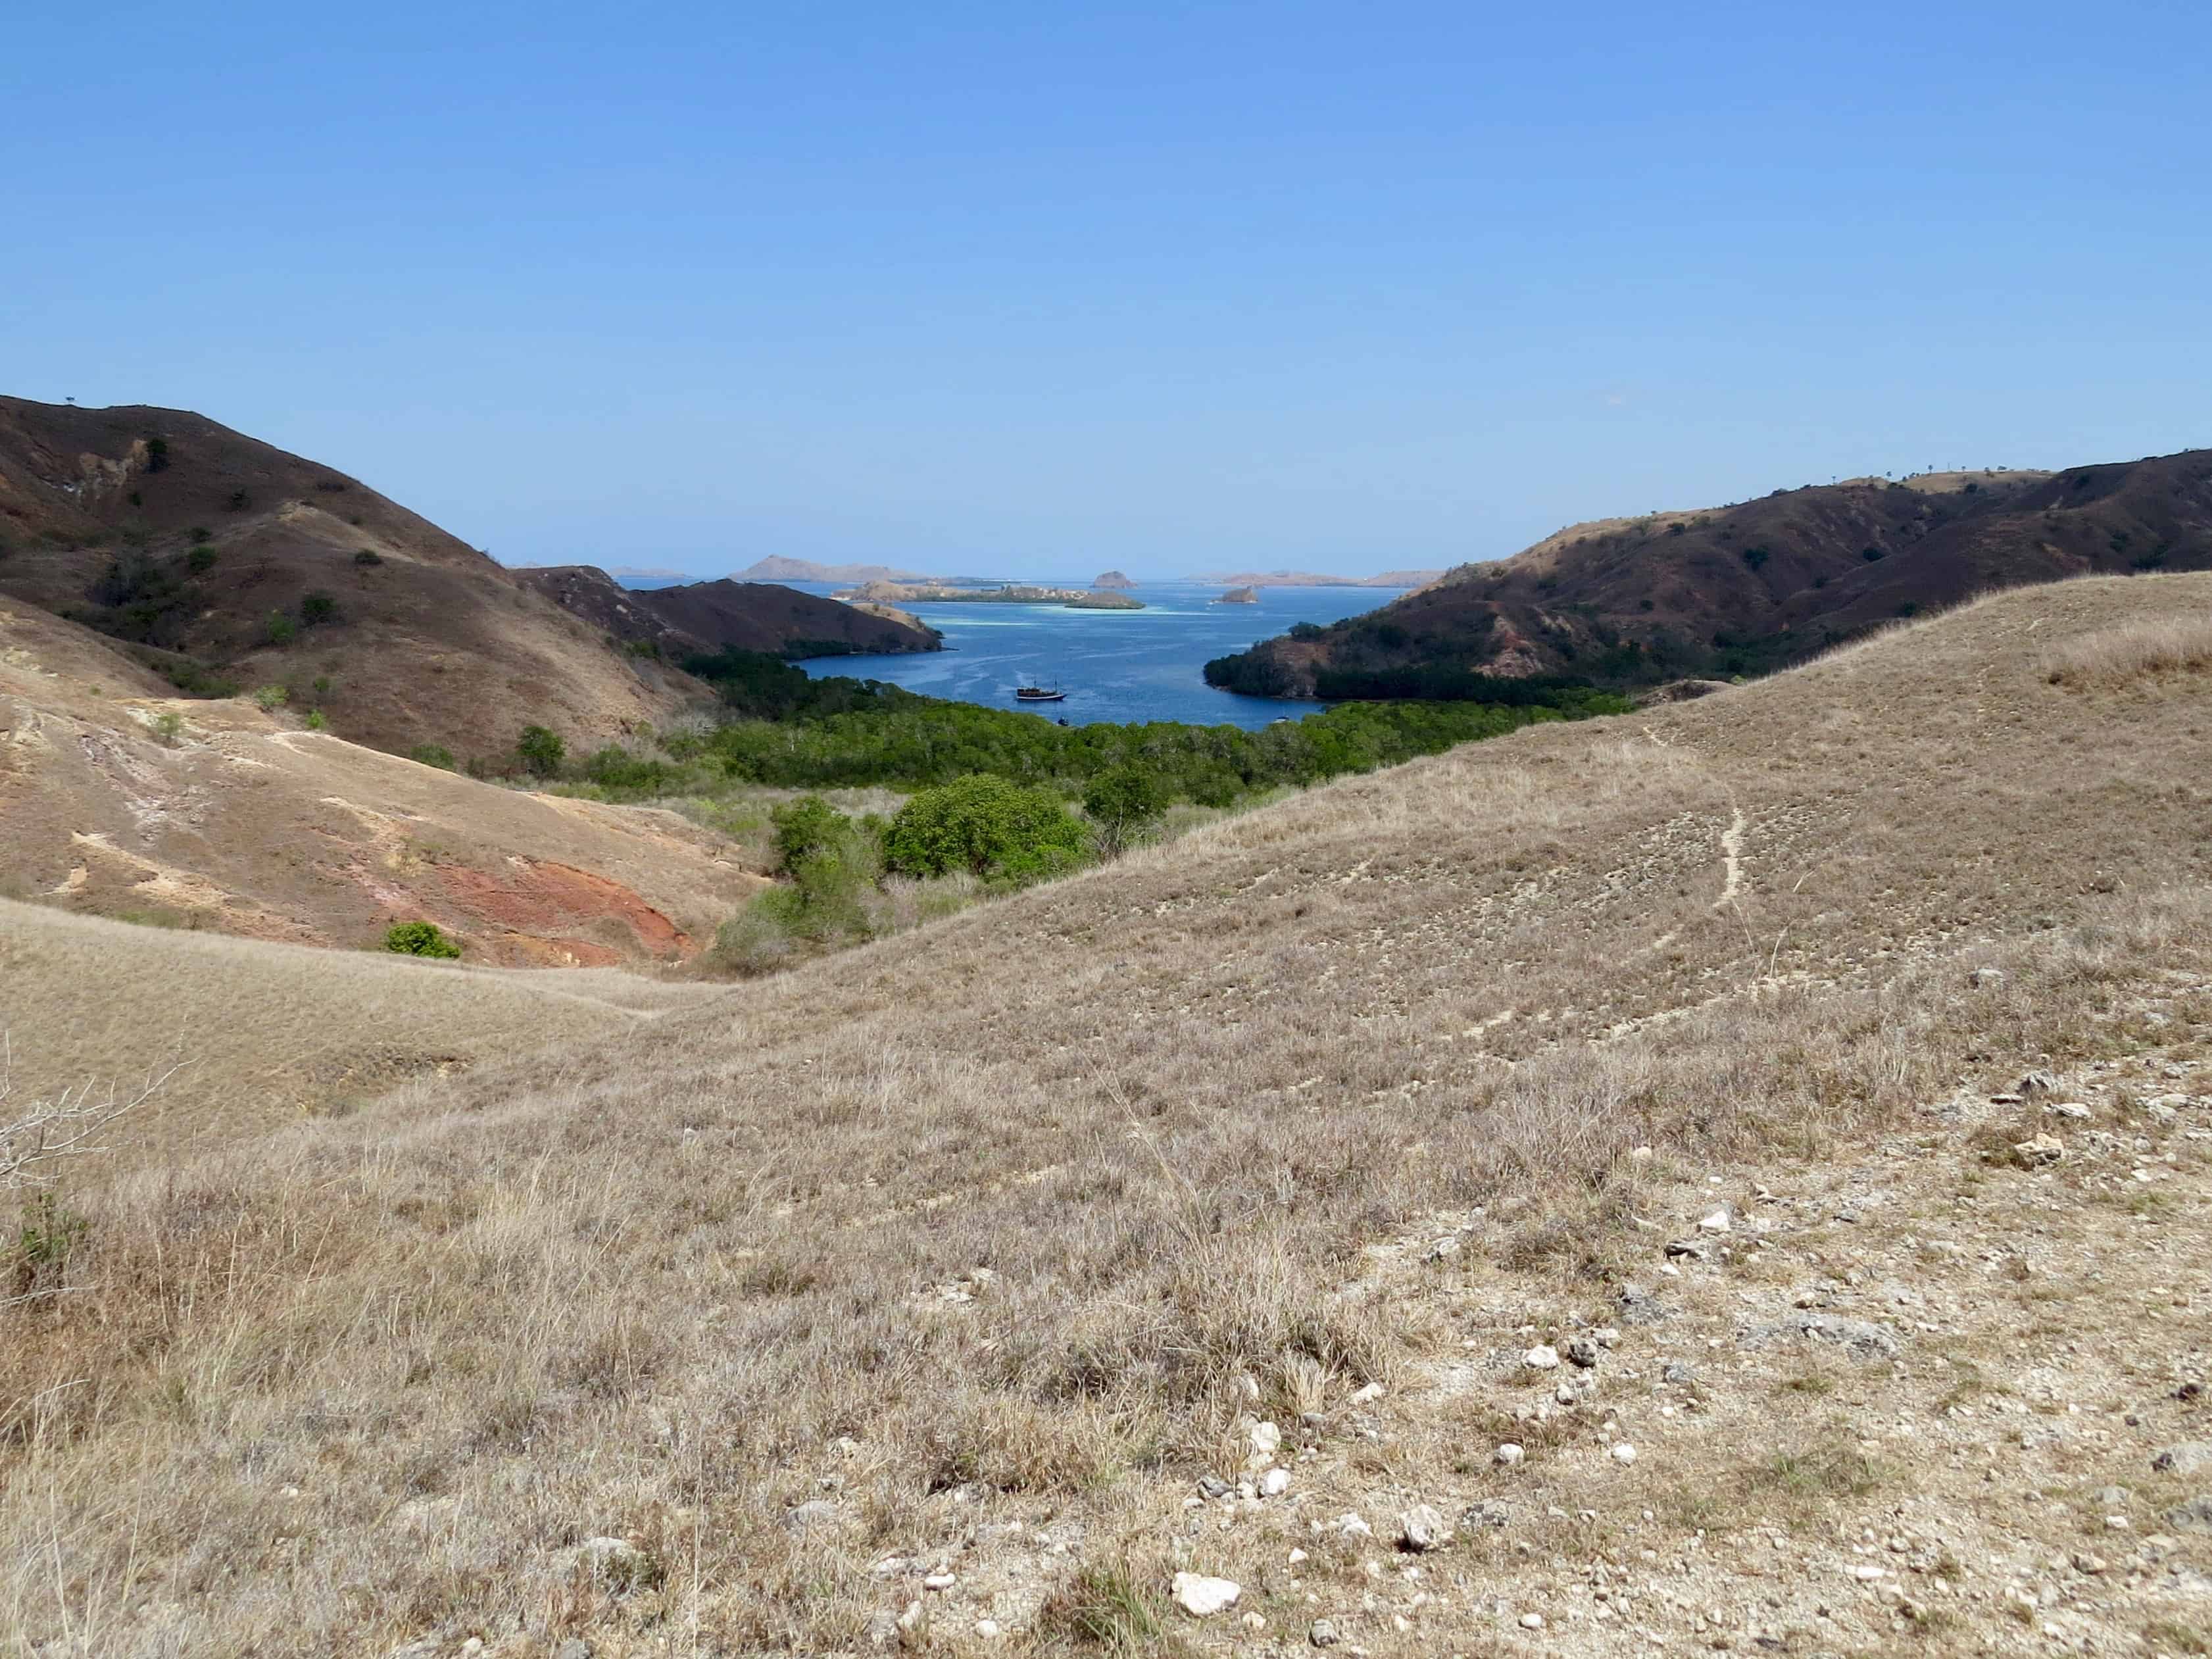 Rinca Island, our second chance to spot Komodo Dragons during our Komodo Island Boat Tour